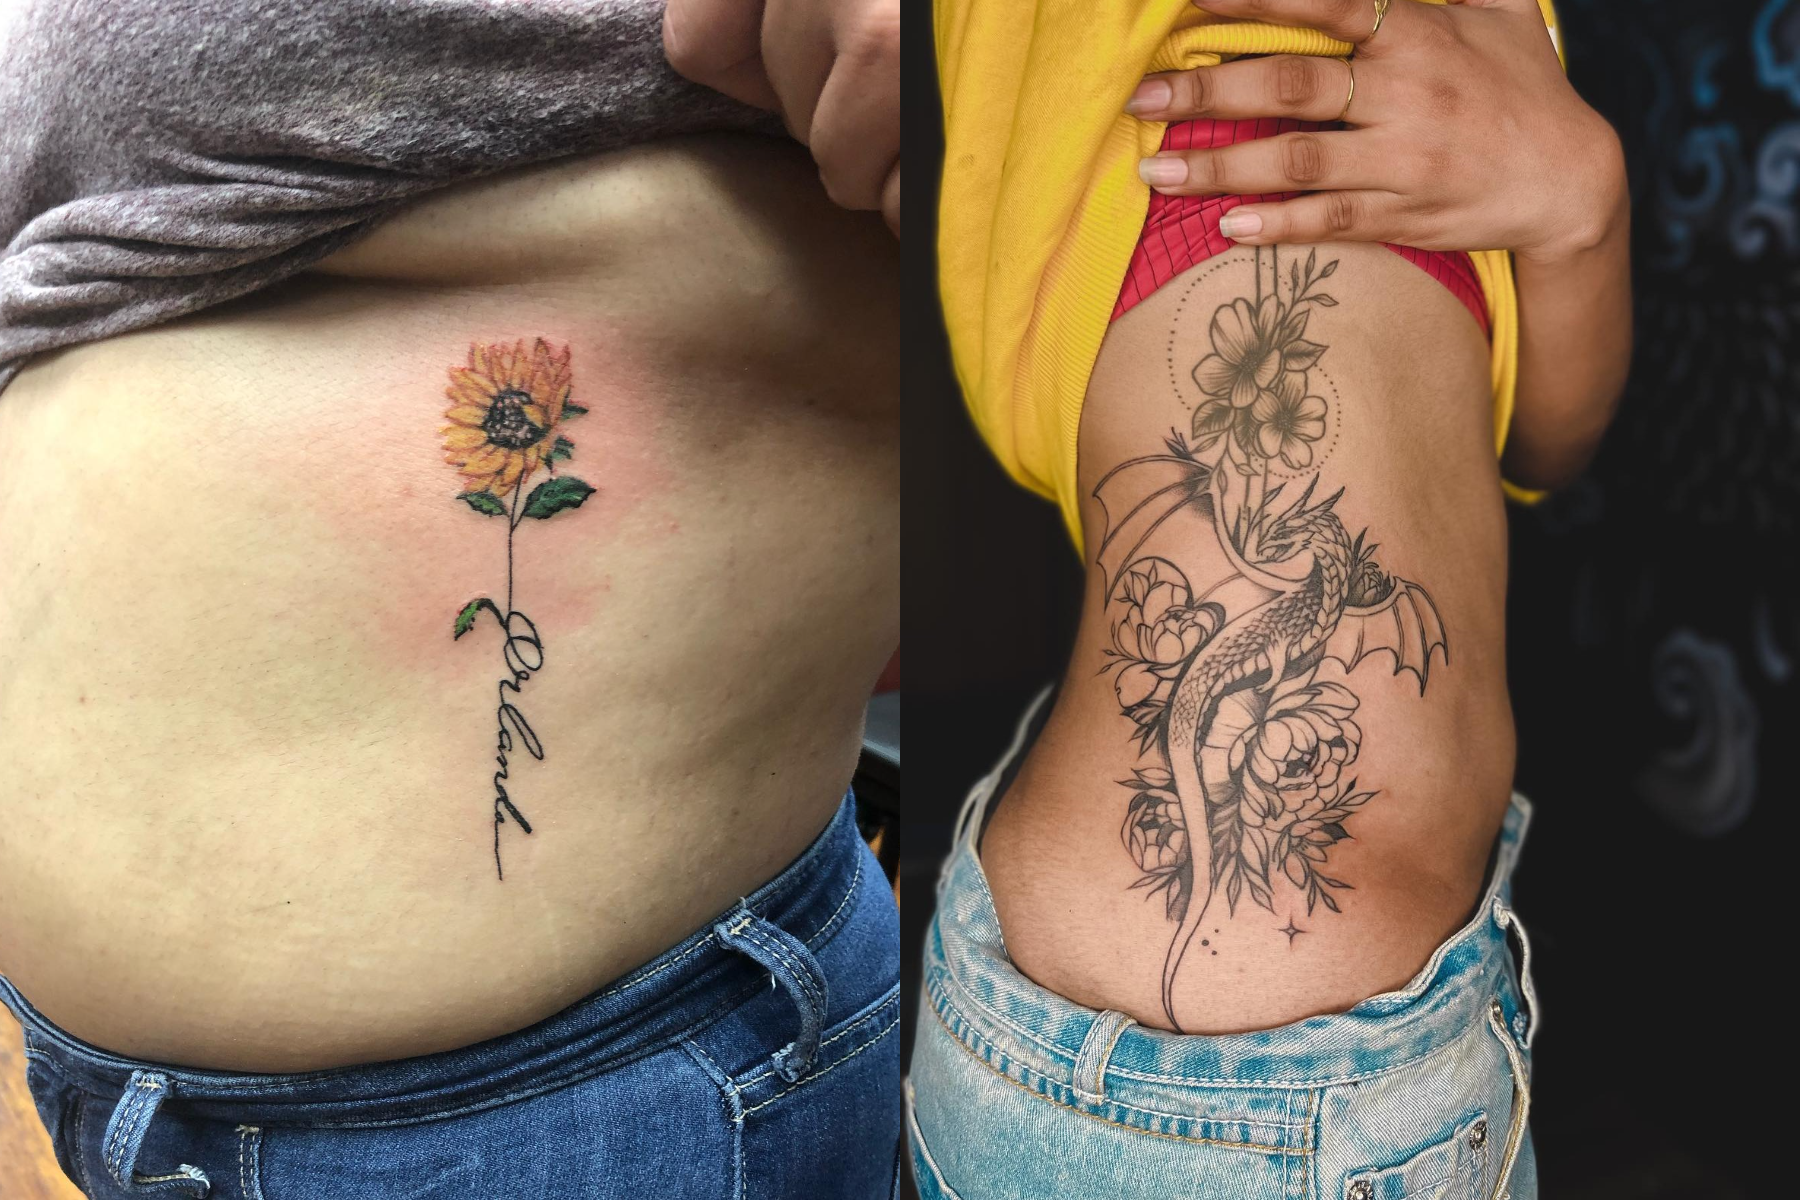 Two ladies in jeans are showcasing their side tattoos